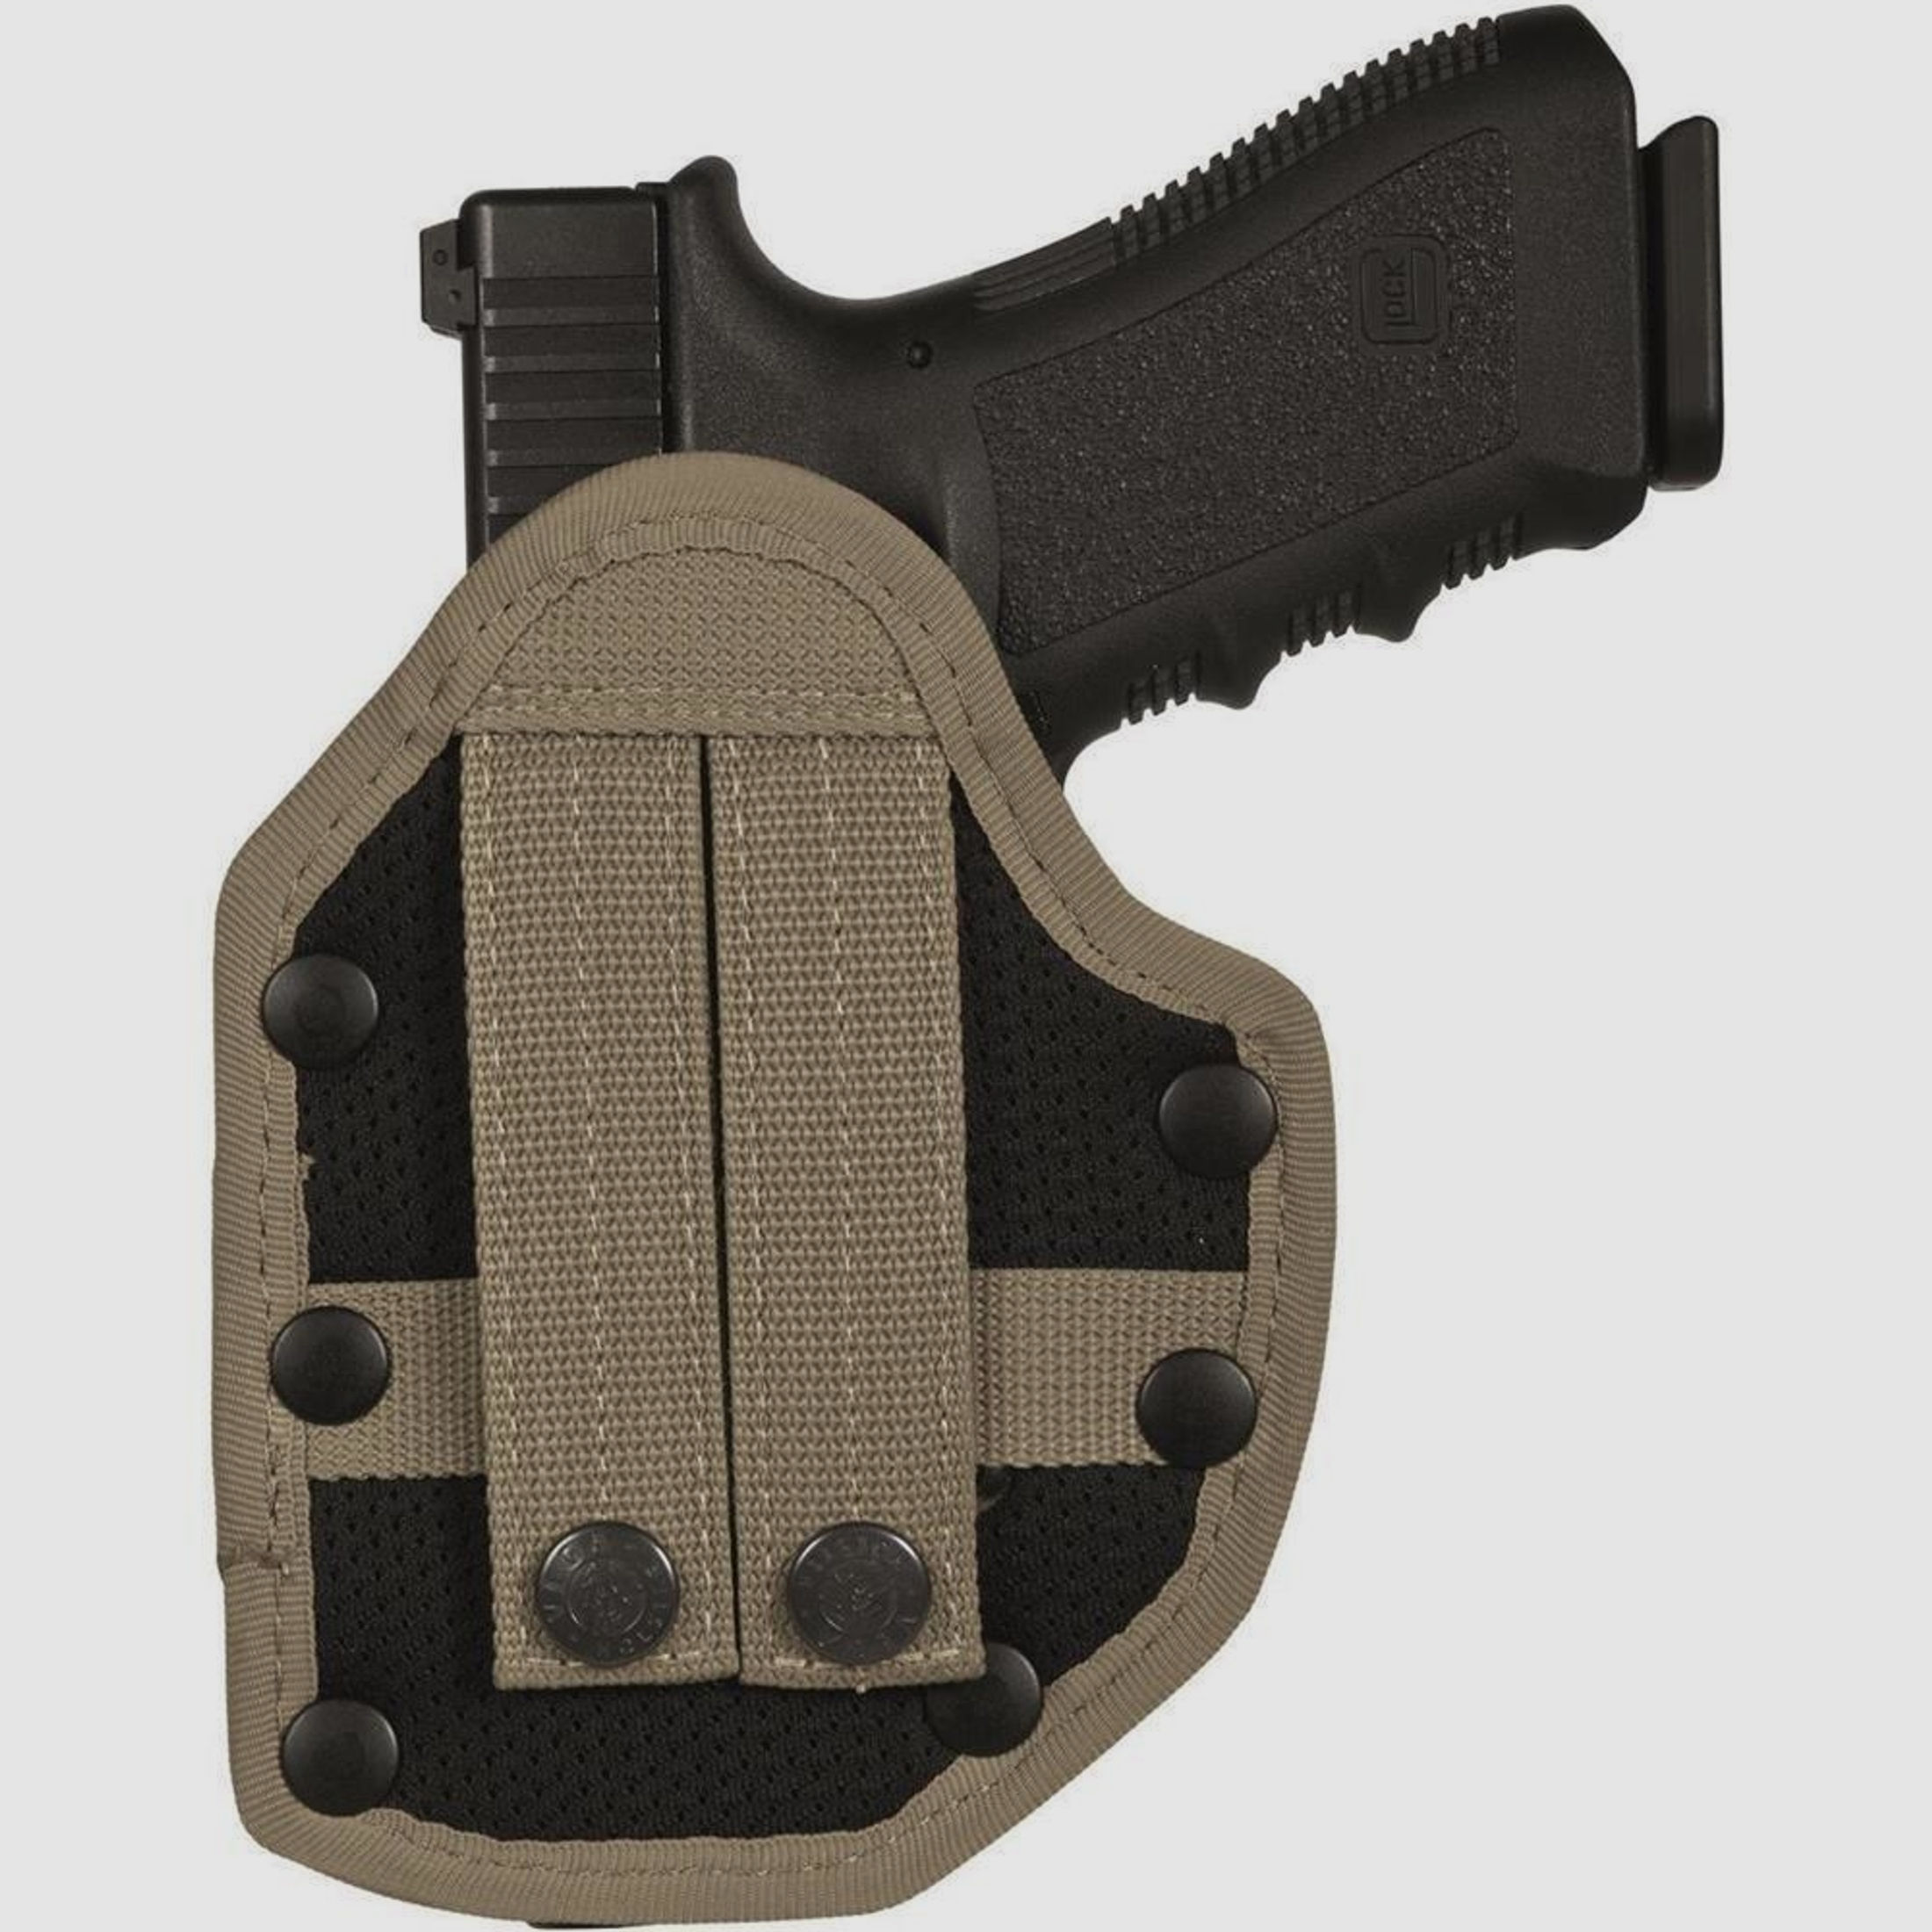 Thermogeformtes Polymerholster "KEEPER" Walther P99Q / PPQ-Coyote TAN-Linkshänder